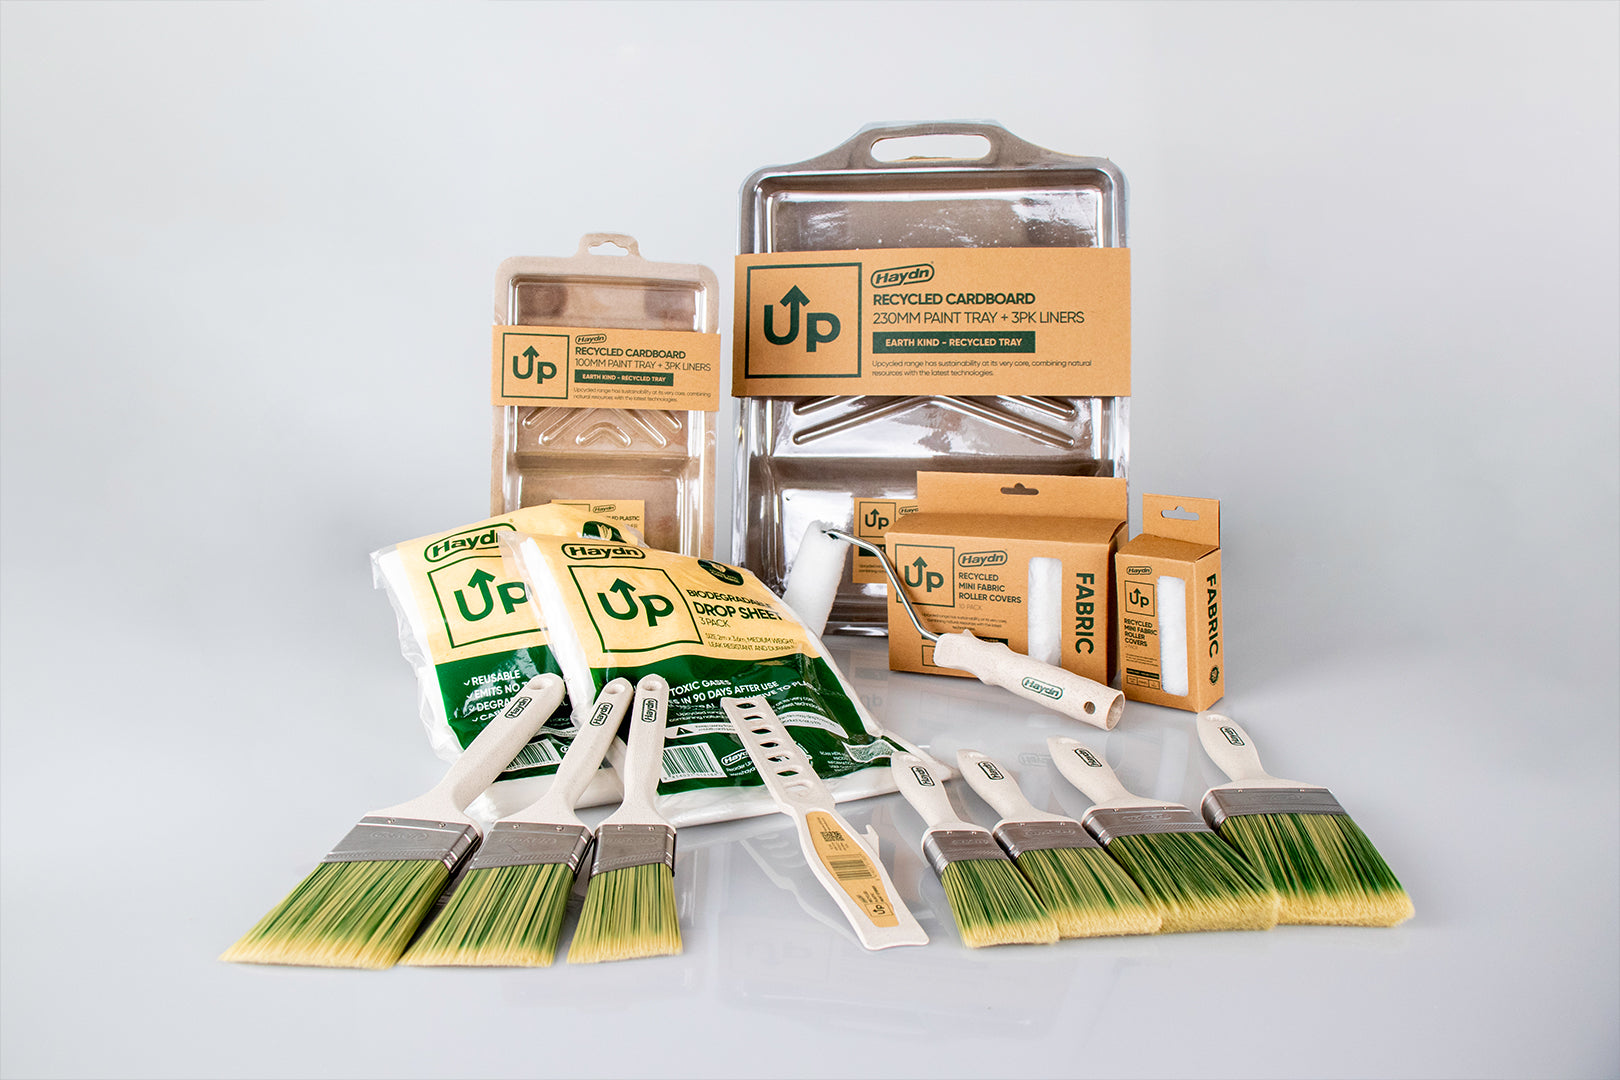 Haydn® UP - Eco-friendly products for DIY projects and house renovations.